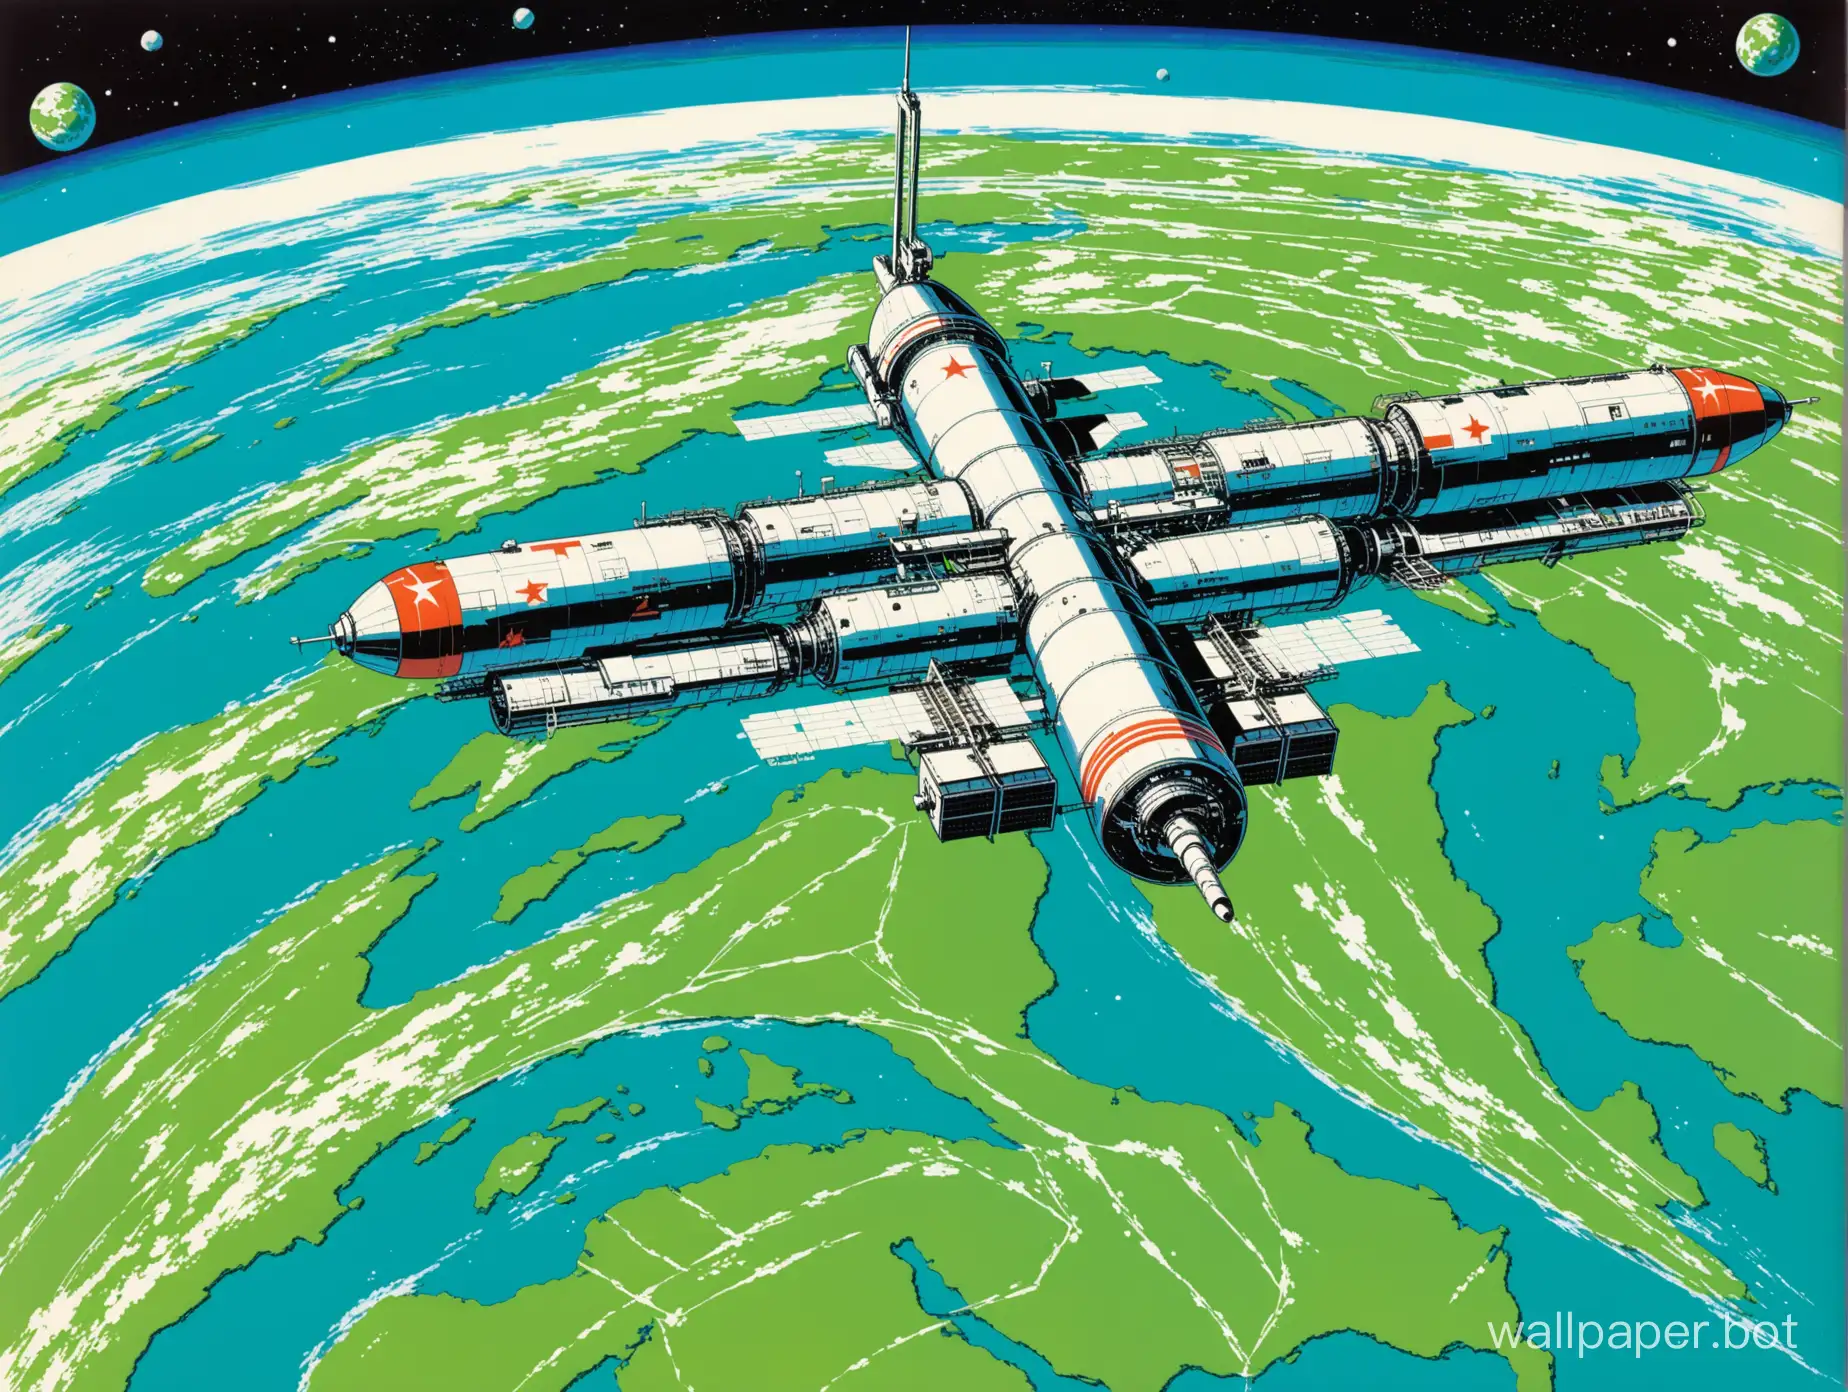 Soviet-MIR-Space-Stations-Orbiting-Earth-in-the-Verdant-1980s